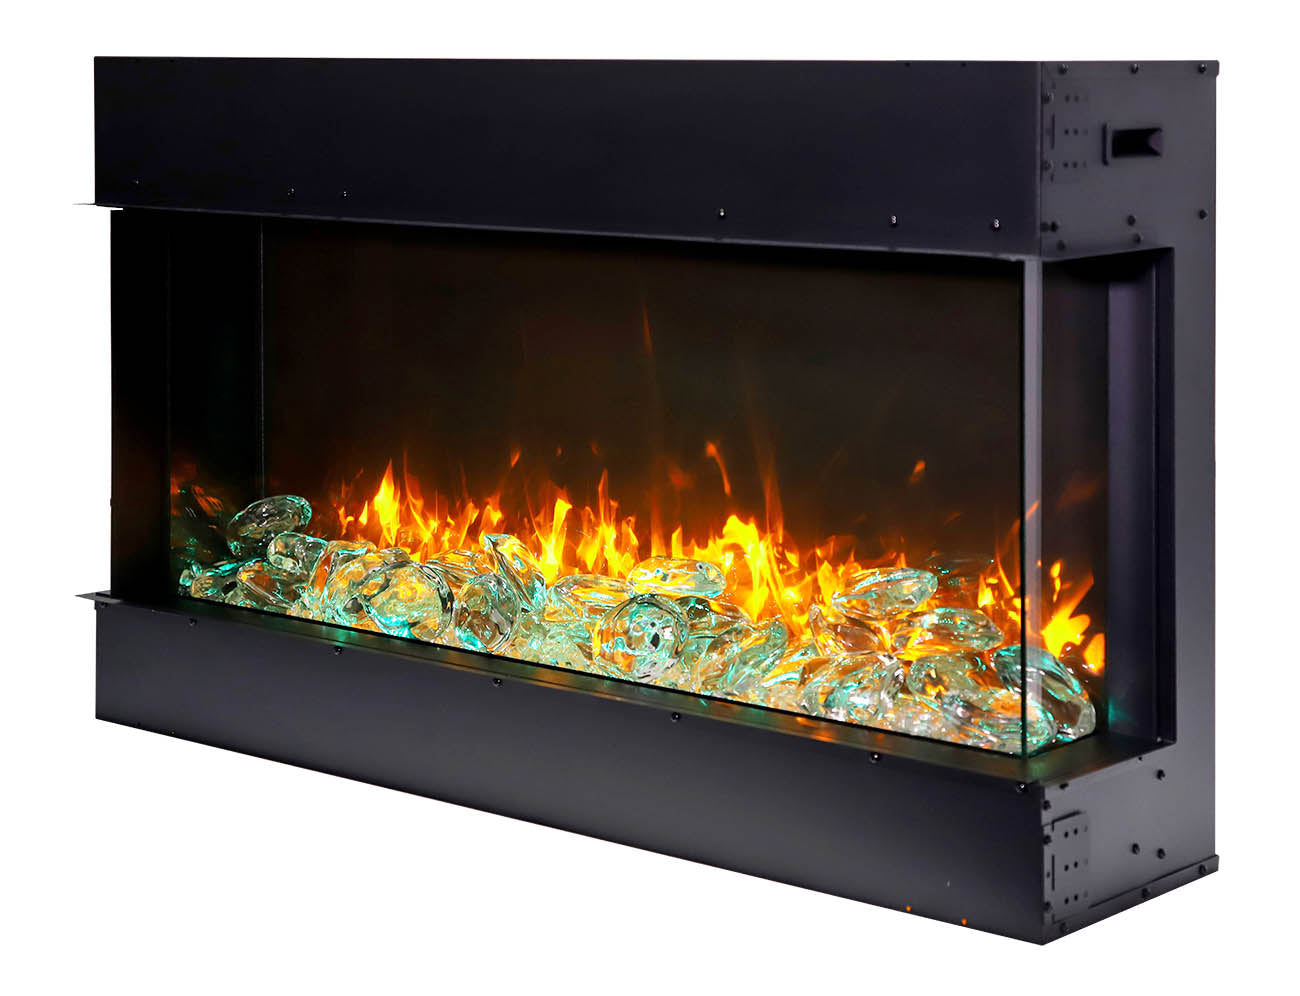 Remii 30-bay-slim – 30″ Wide X 10 5/8″ in Depth – 3 Sided Glass Electric Fireplace